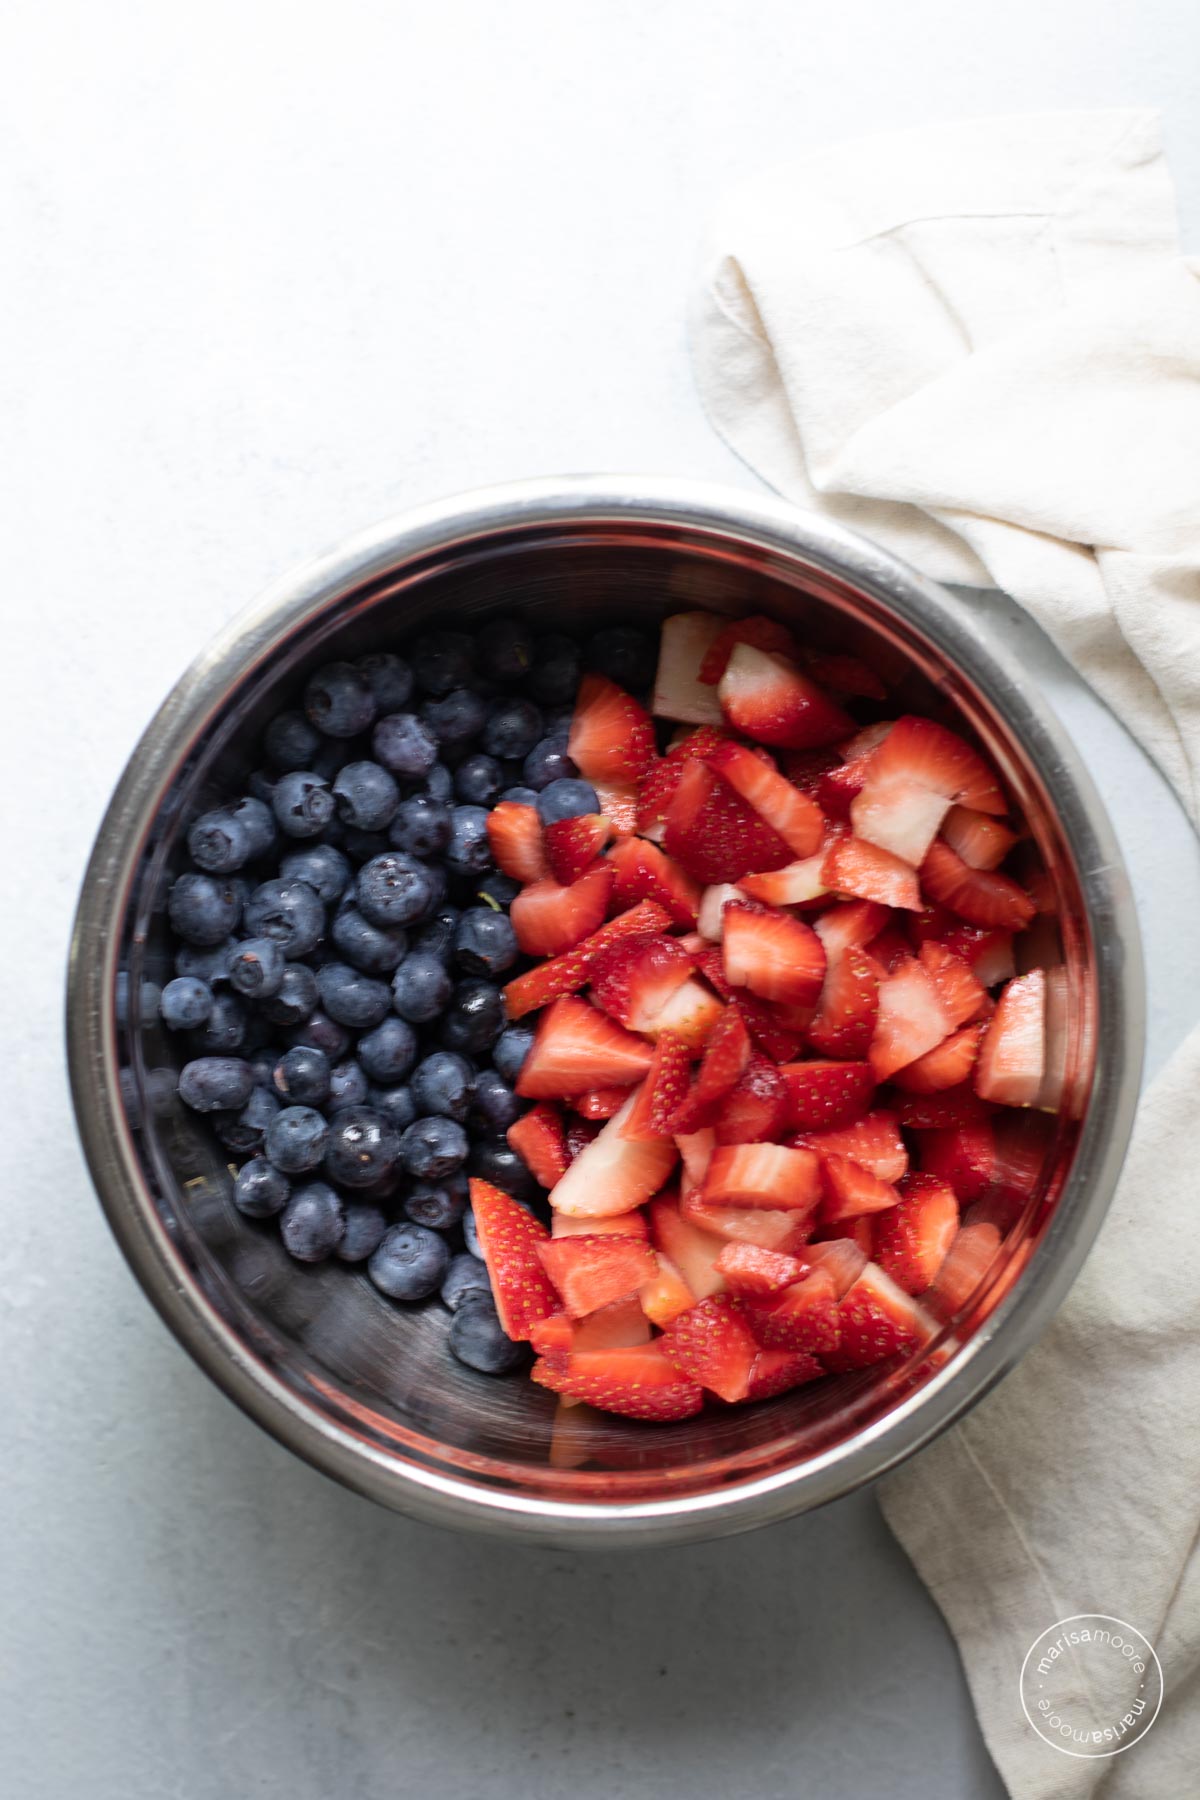 Chopped strawberries and whole blueberries in a stainless steel mixing bowl